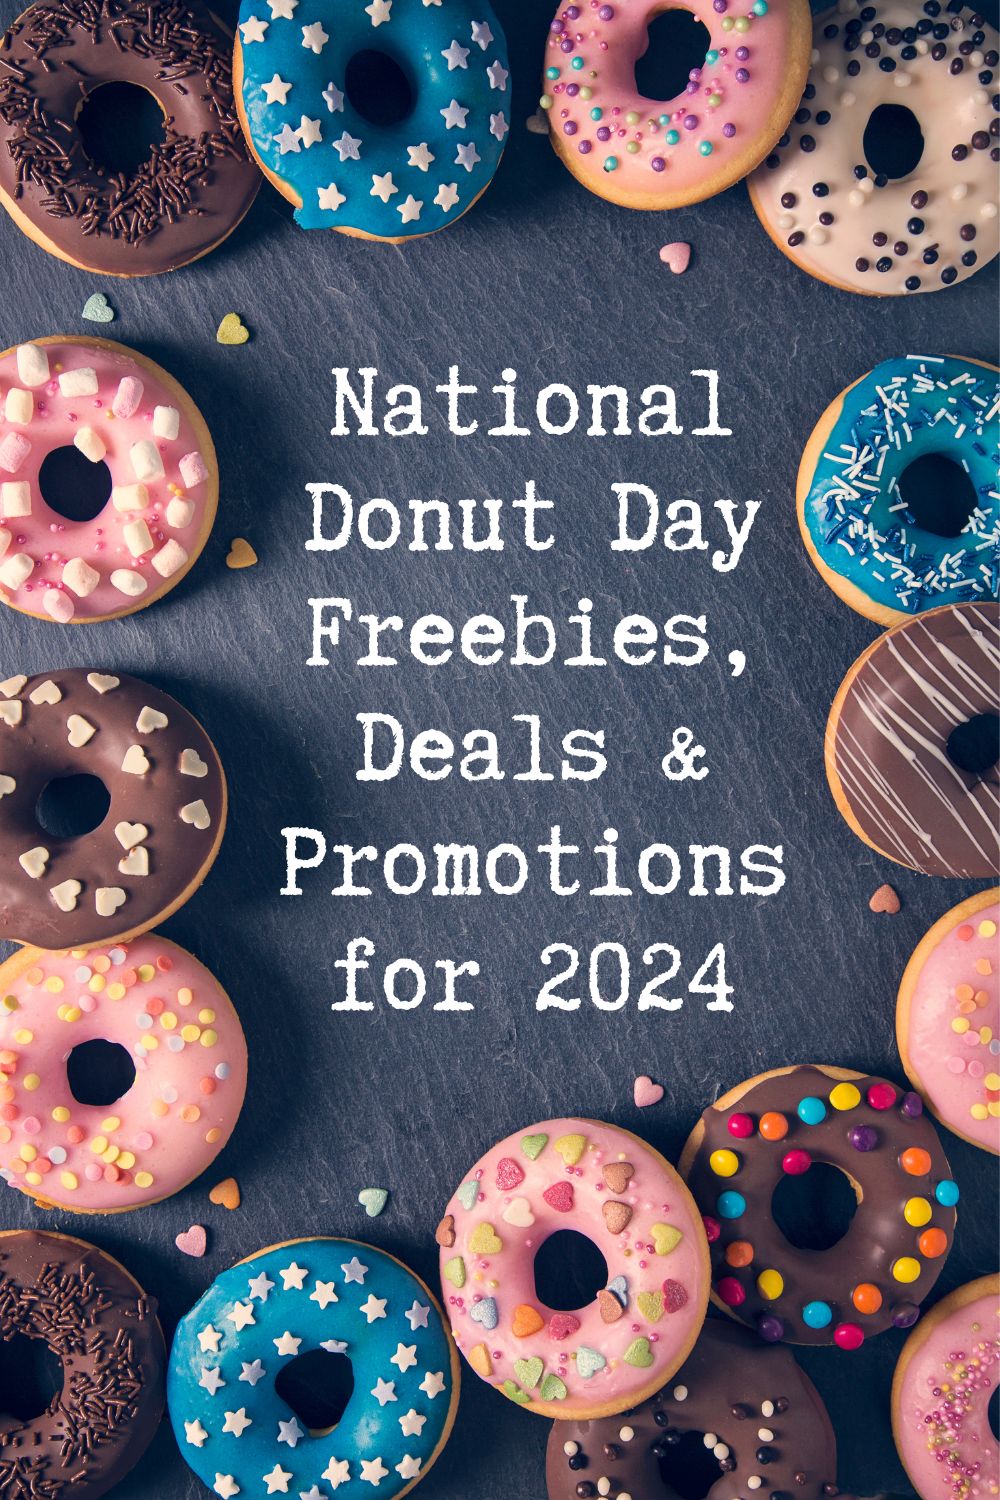 National Donut Day Freebies And Deals For 2024